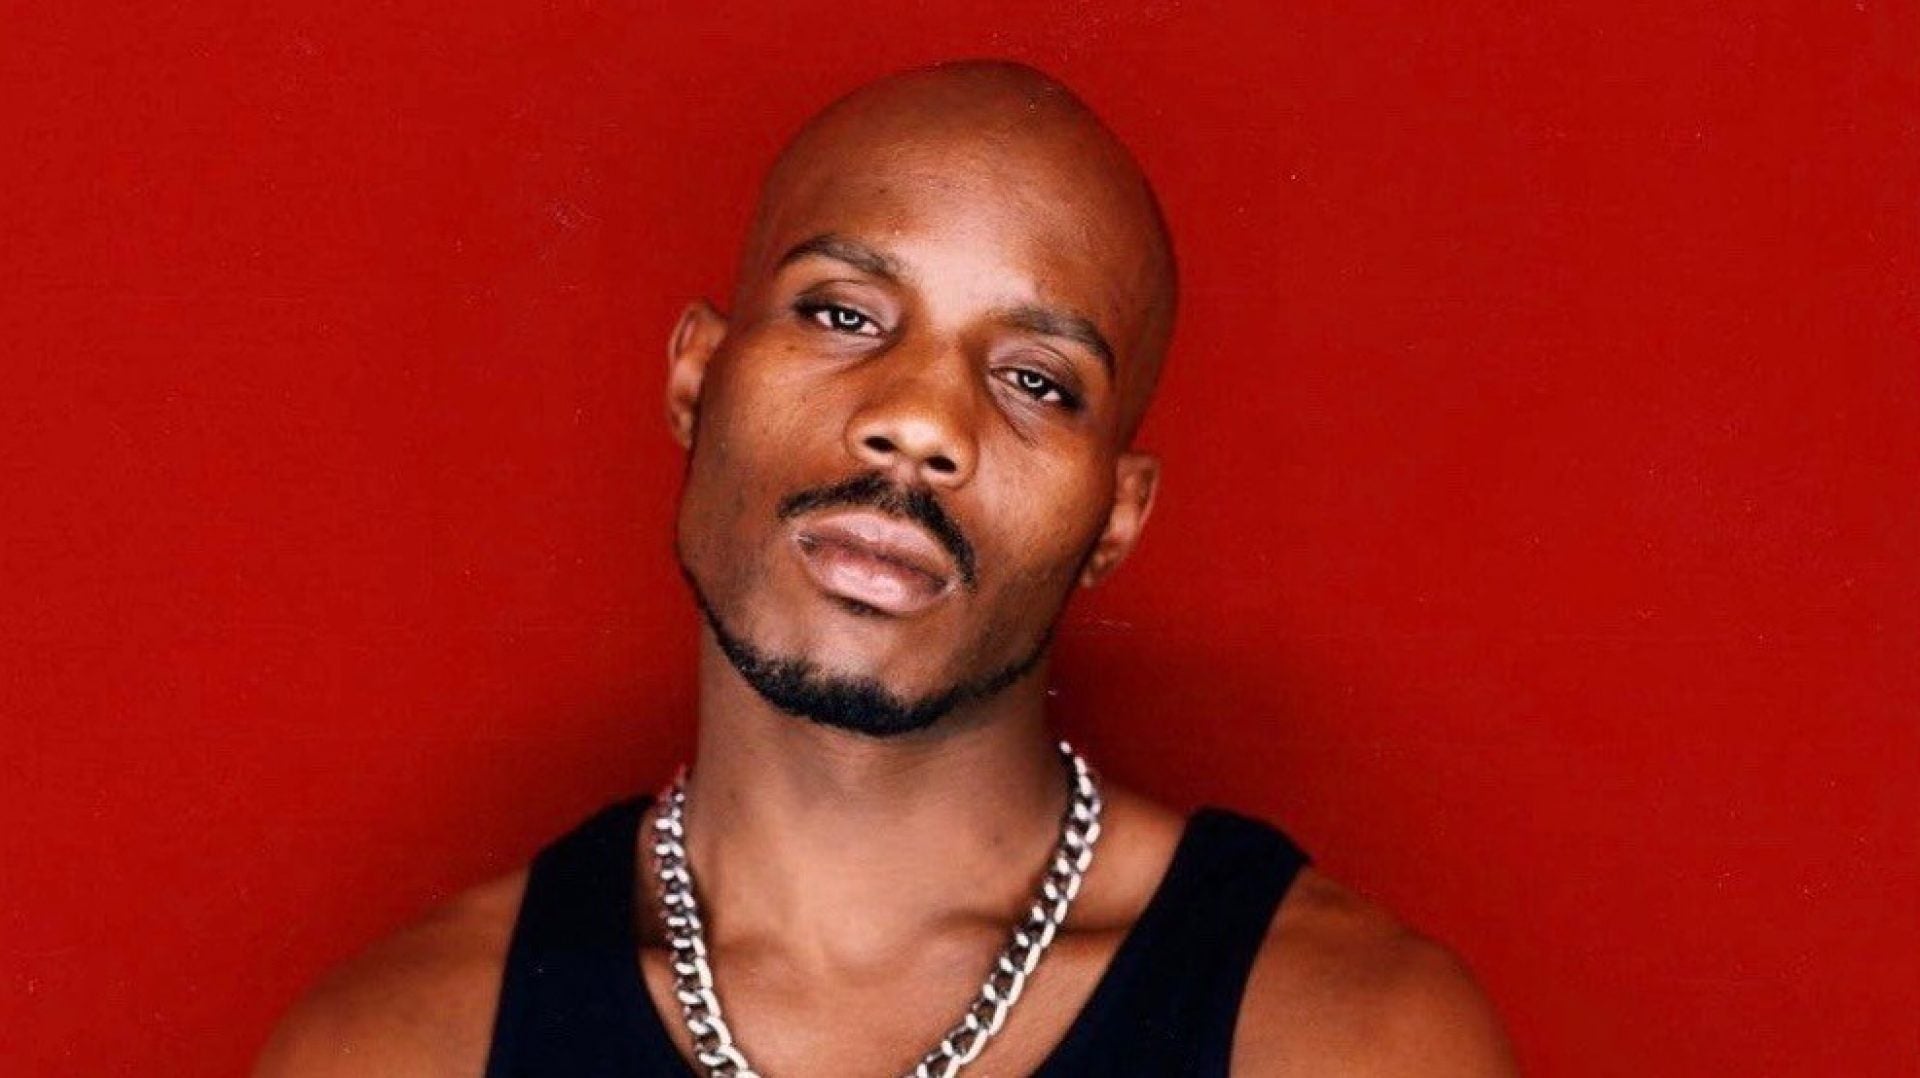 Remembering DMX: A Look Back At His Influence On Fashion Through Hip Hop